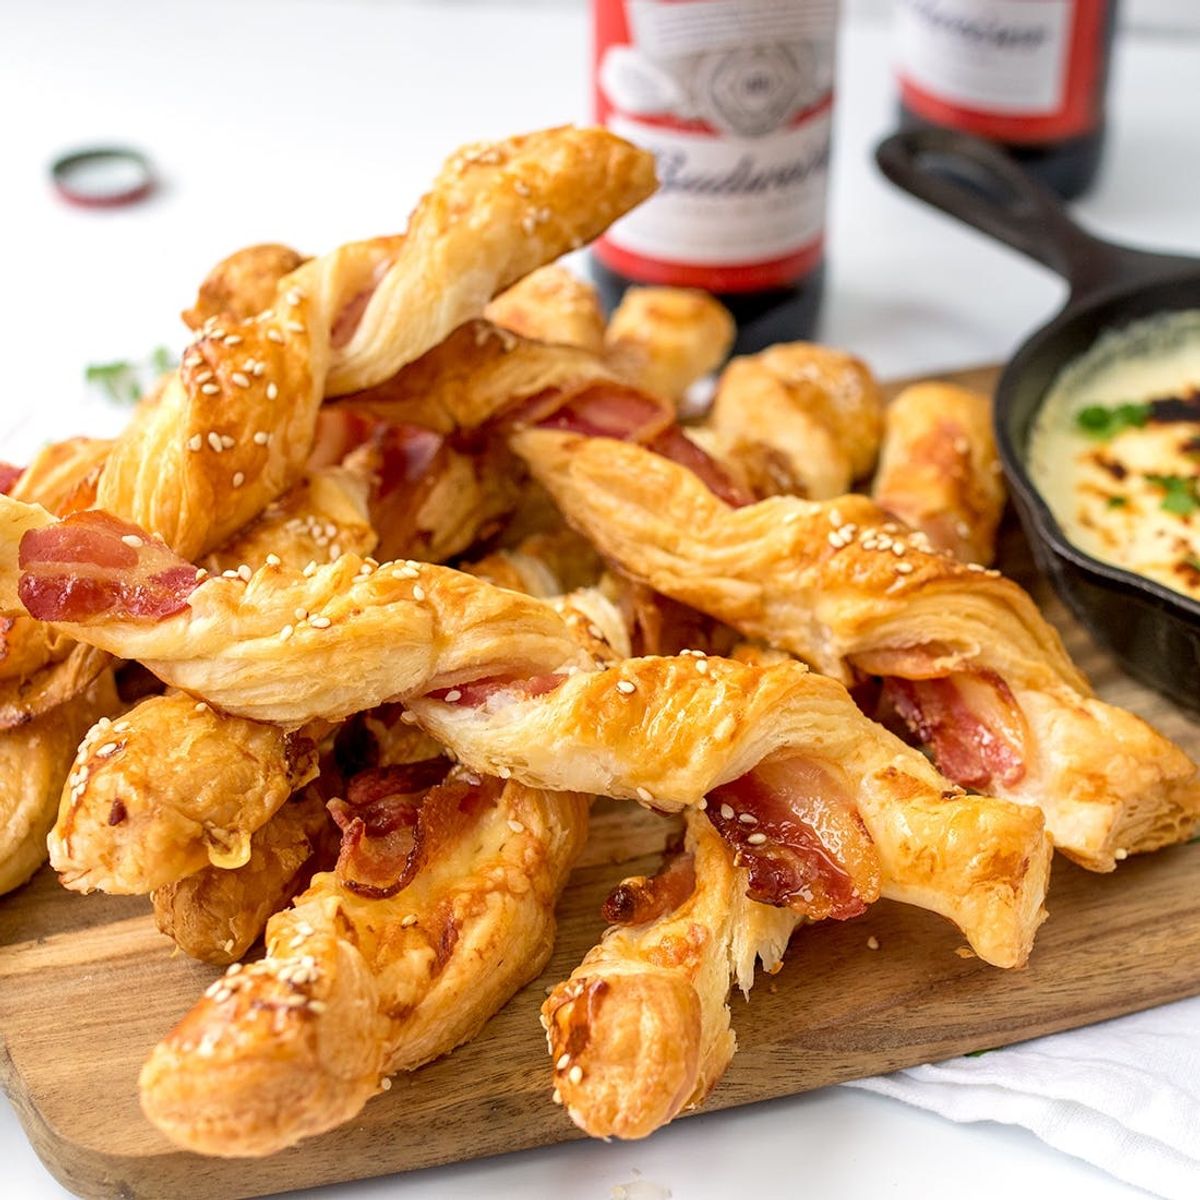 Make This Gameday Bacon Pastry Twists With Beer Cheese Dip Recipe